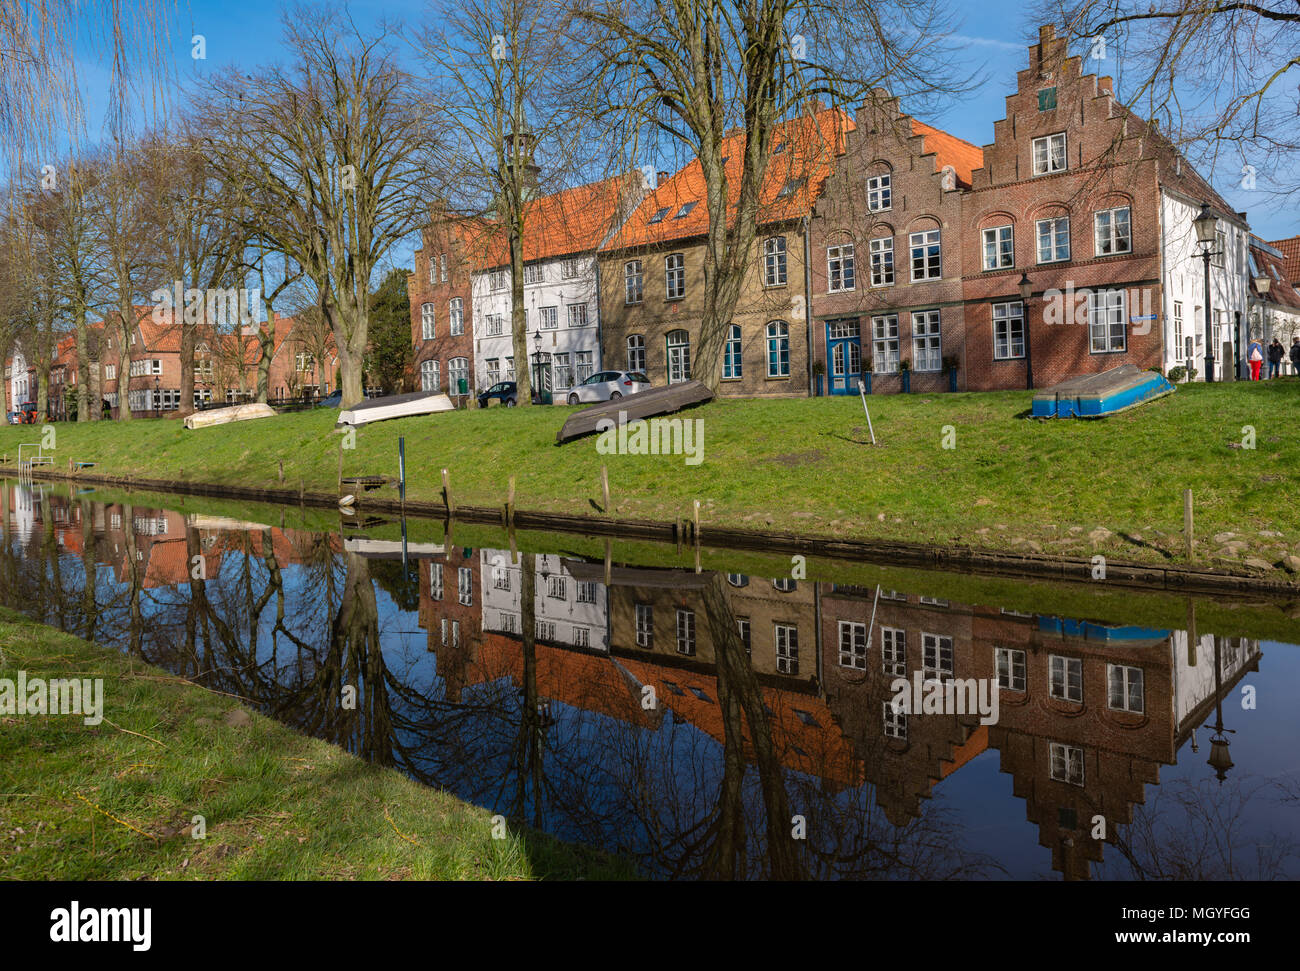 Gabled houses on the market square in the so-called 'Dutch' town with its town canals, Friedrichstadt, Schleswig-Holstein, Germany, Europe Stock Photo